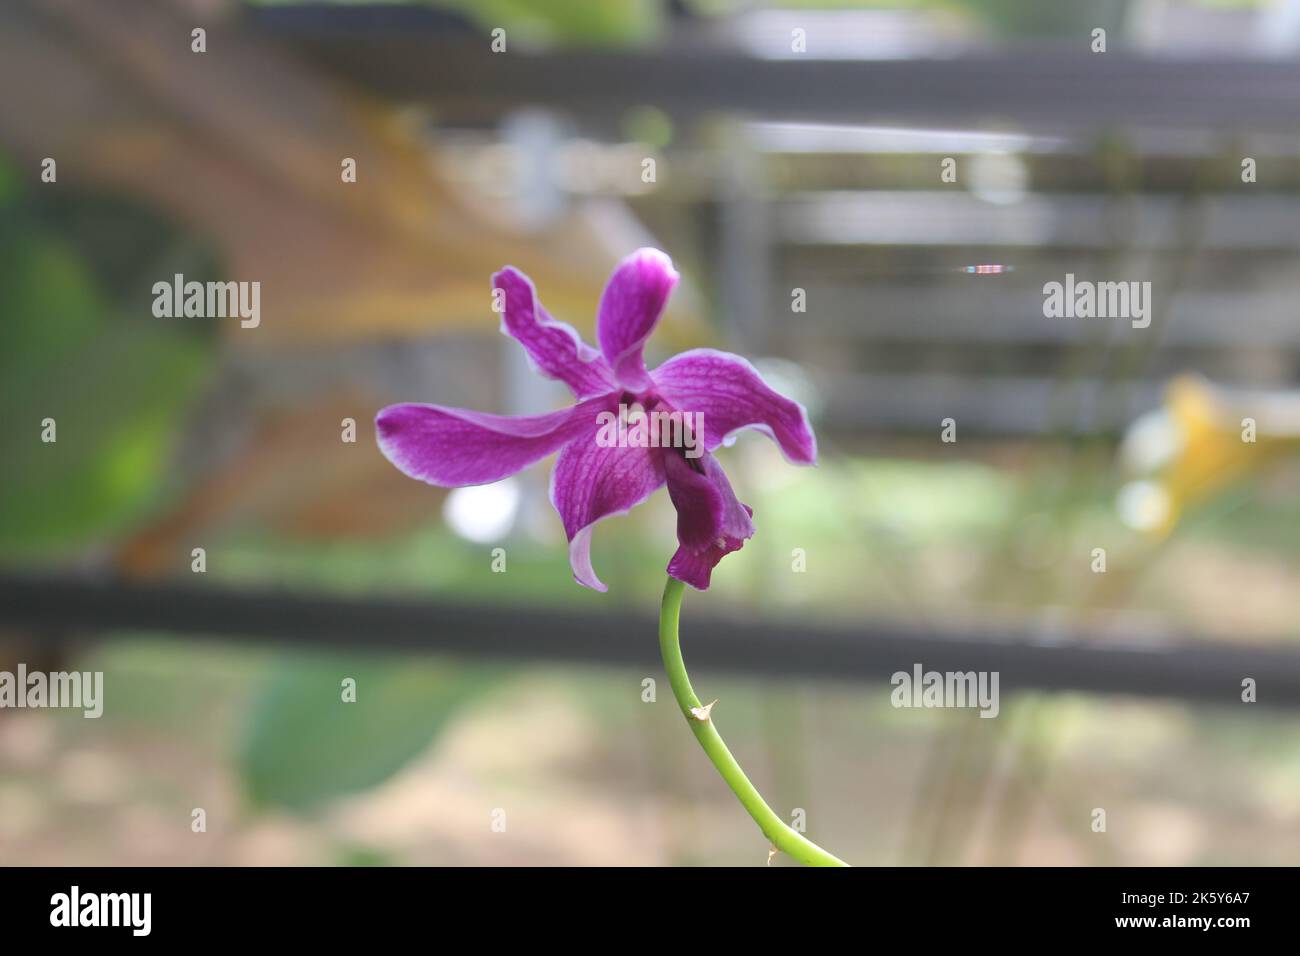 Selective focus of beautiful dendrobium orchid (Dendrobium sp.) flower in garden. Family: Orchidaceae. Stock Photo